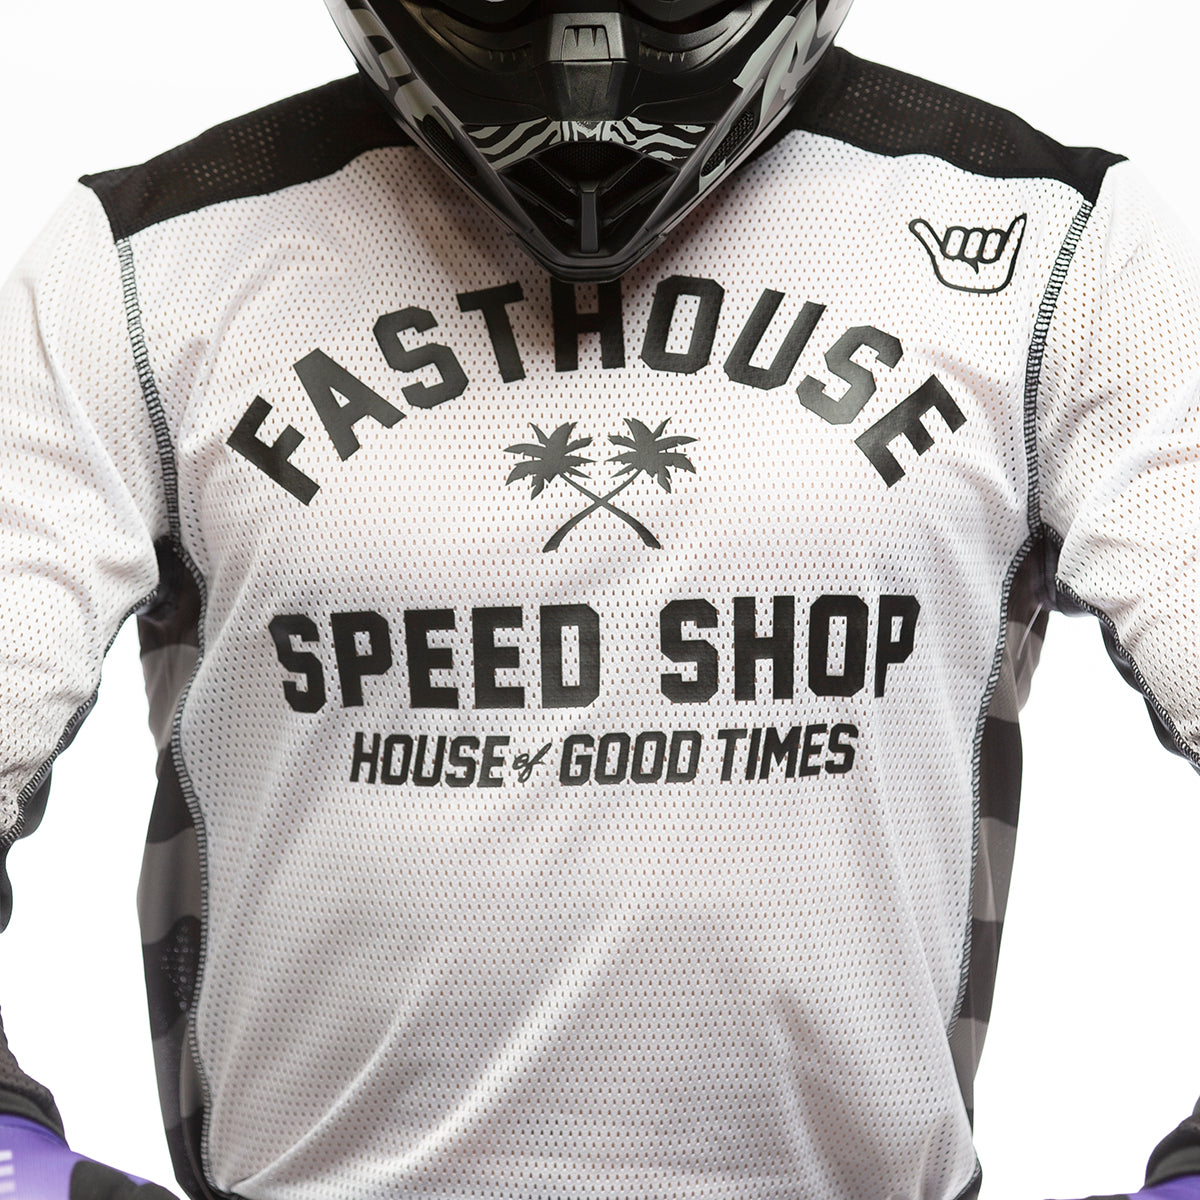 A/C Grindhouse Asher Jersey - White/Black